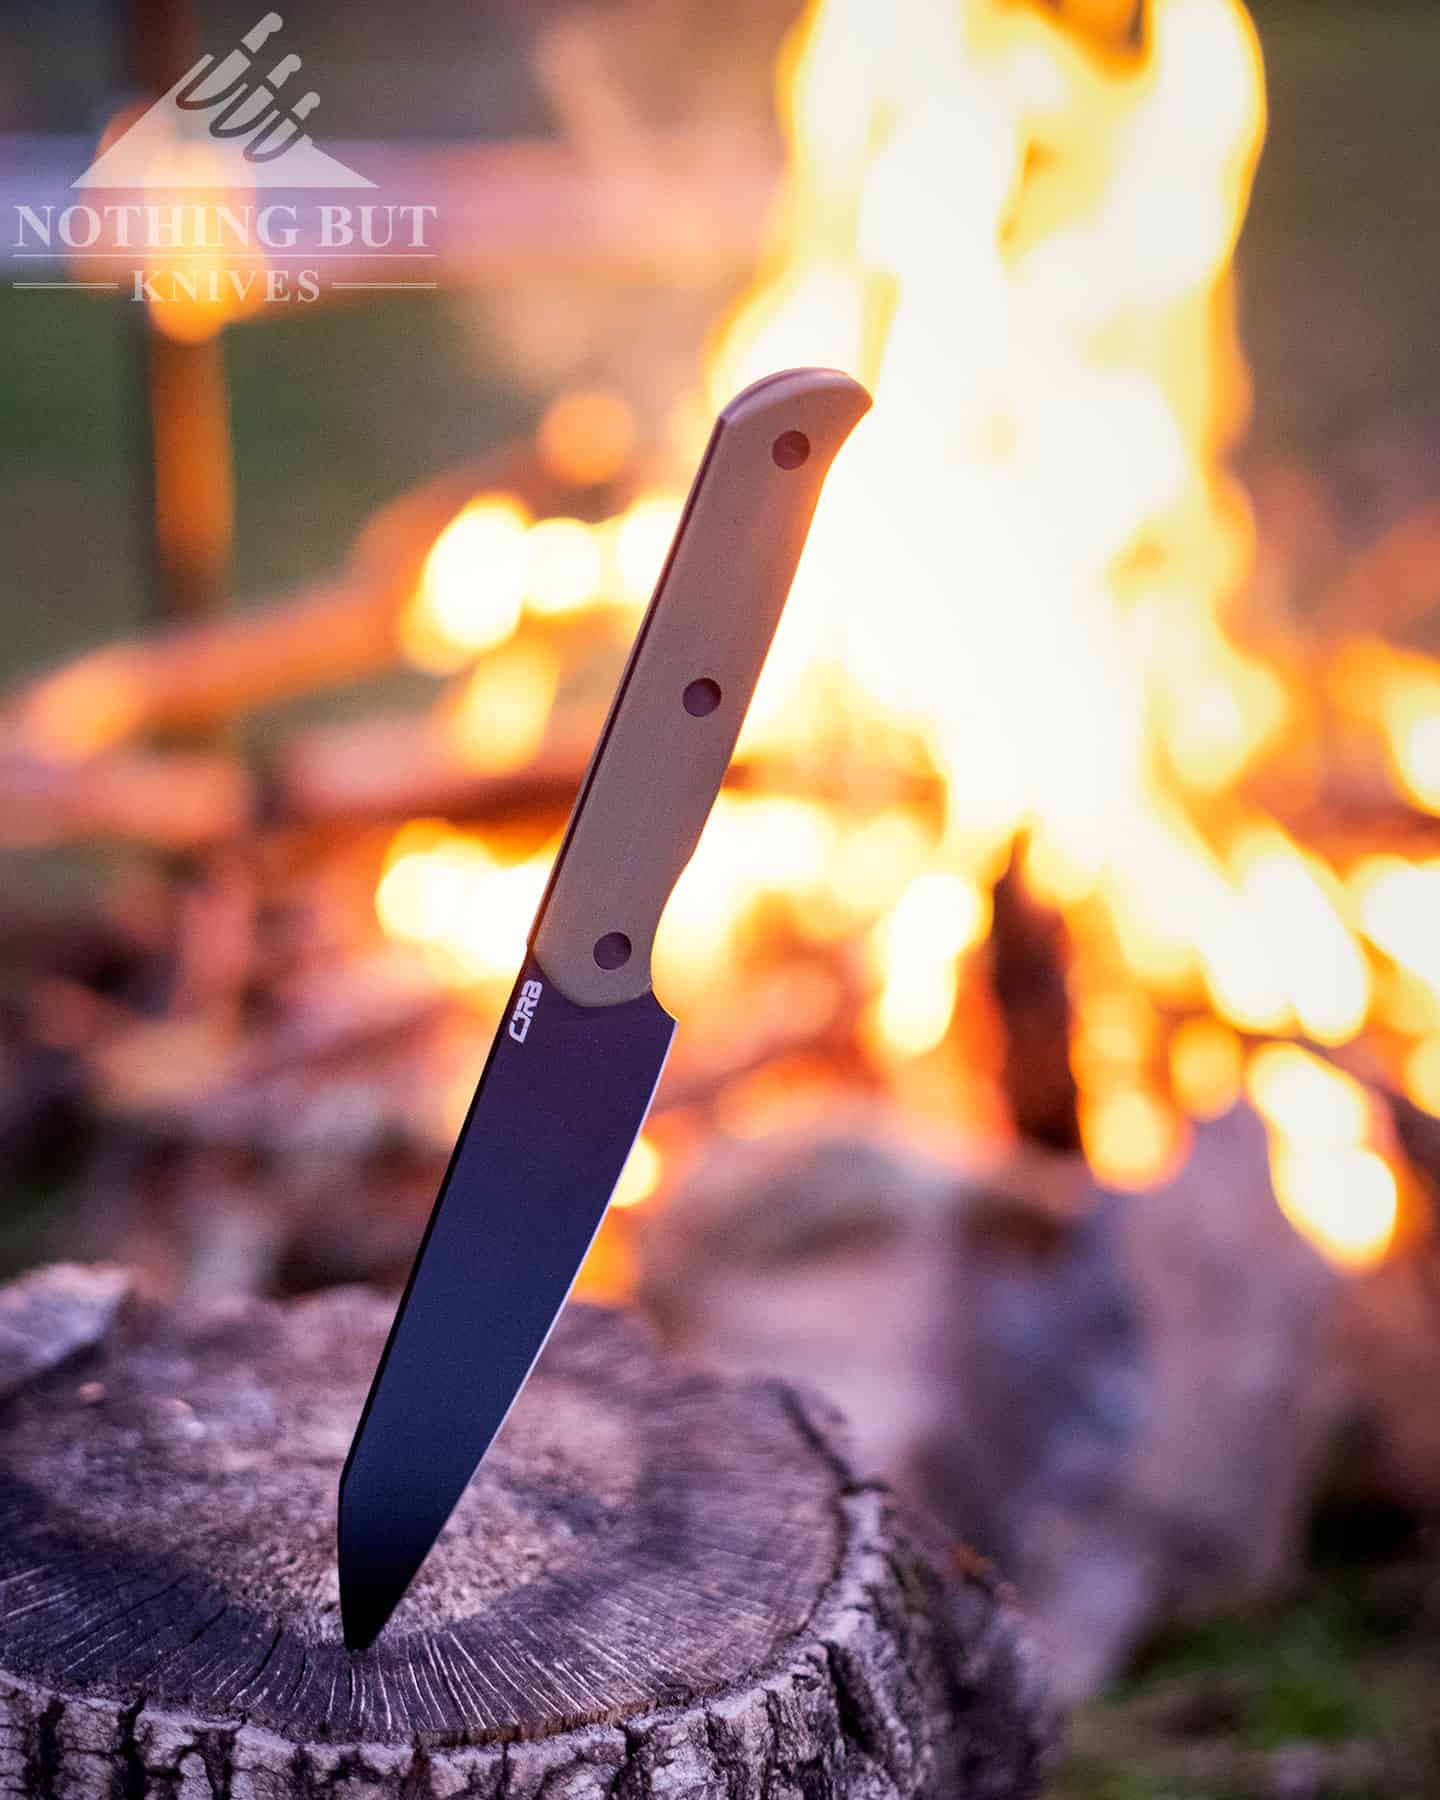 The CJRB Silax fixed blade knife next to a campfire that will be used to cook food the knife prepared.